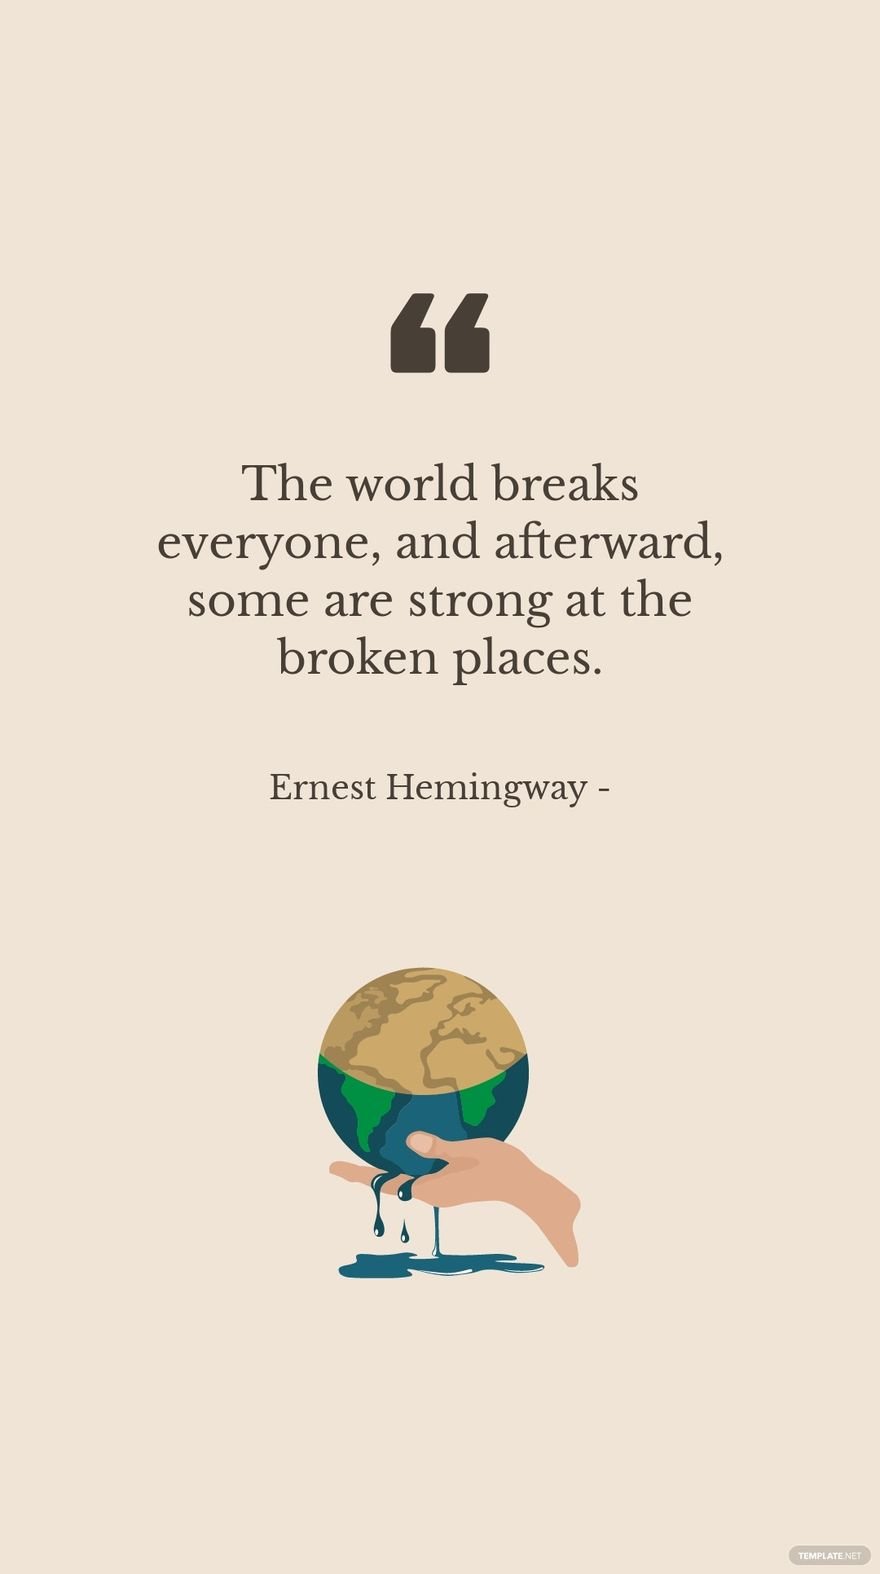 Free Ernest Hemingway - The world breaks everyone, and afterward, some are strong at the broken places. in JPG